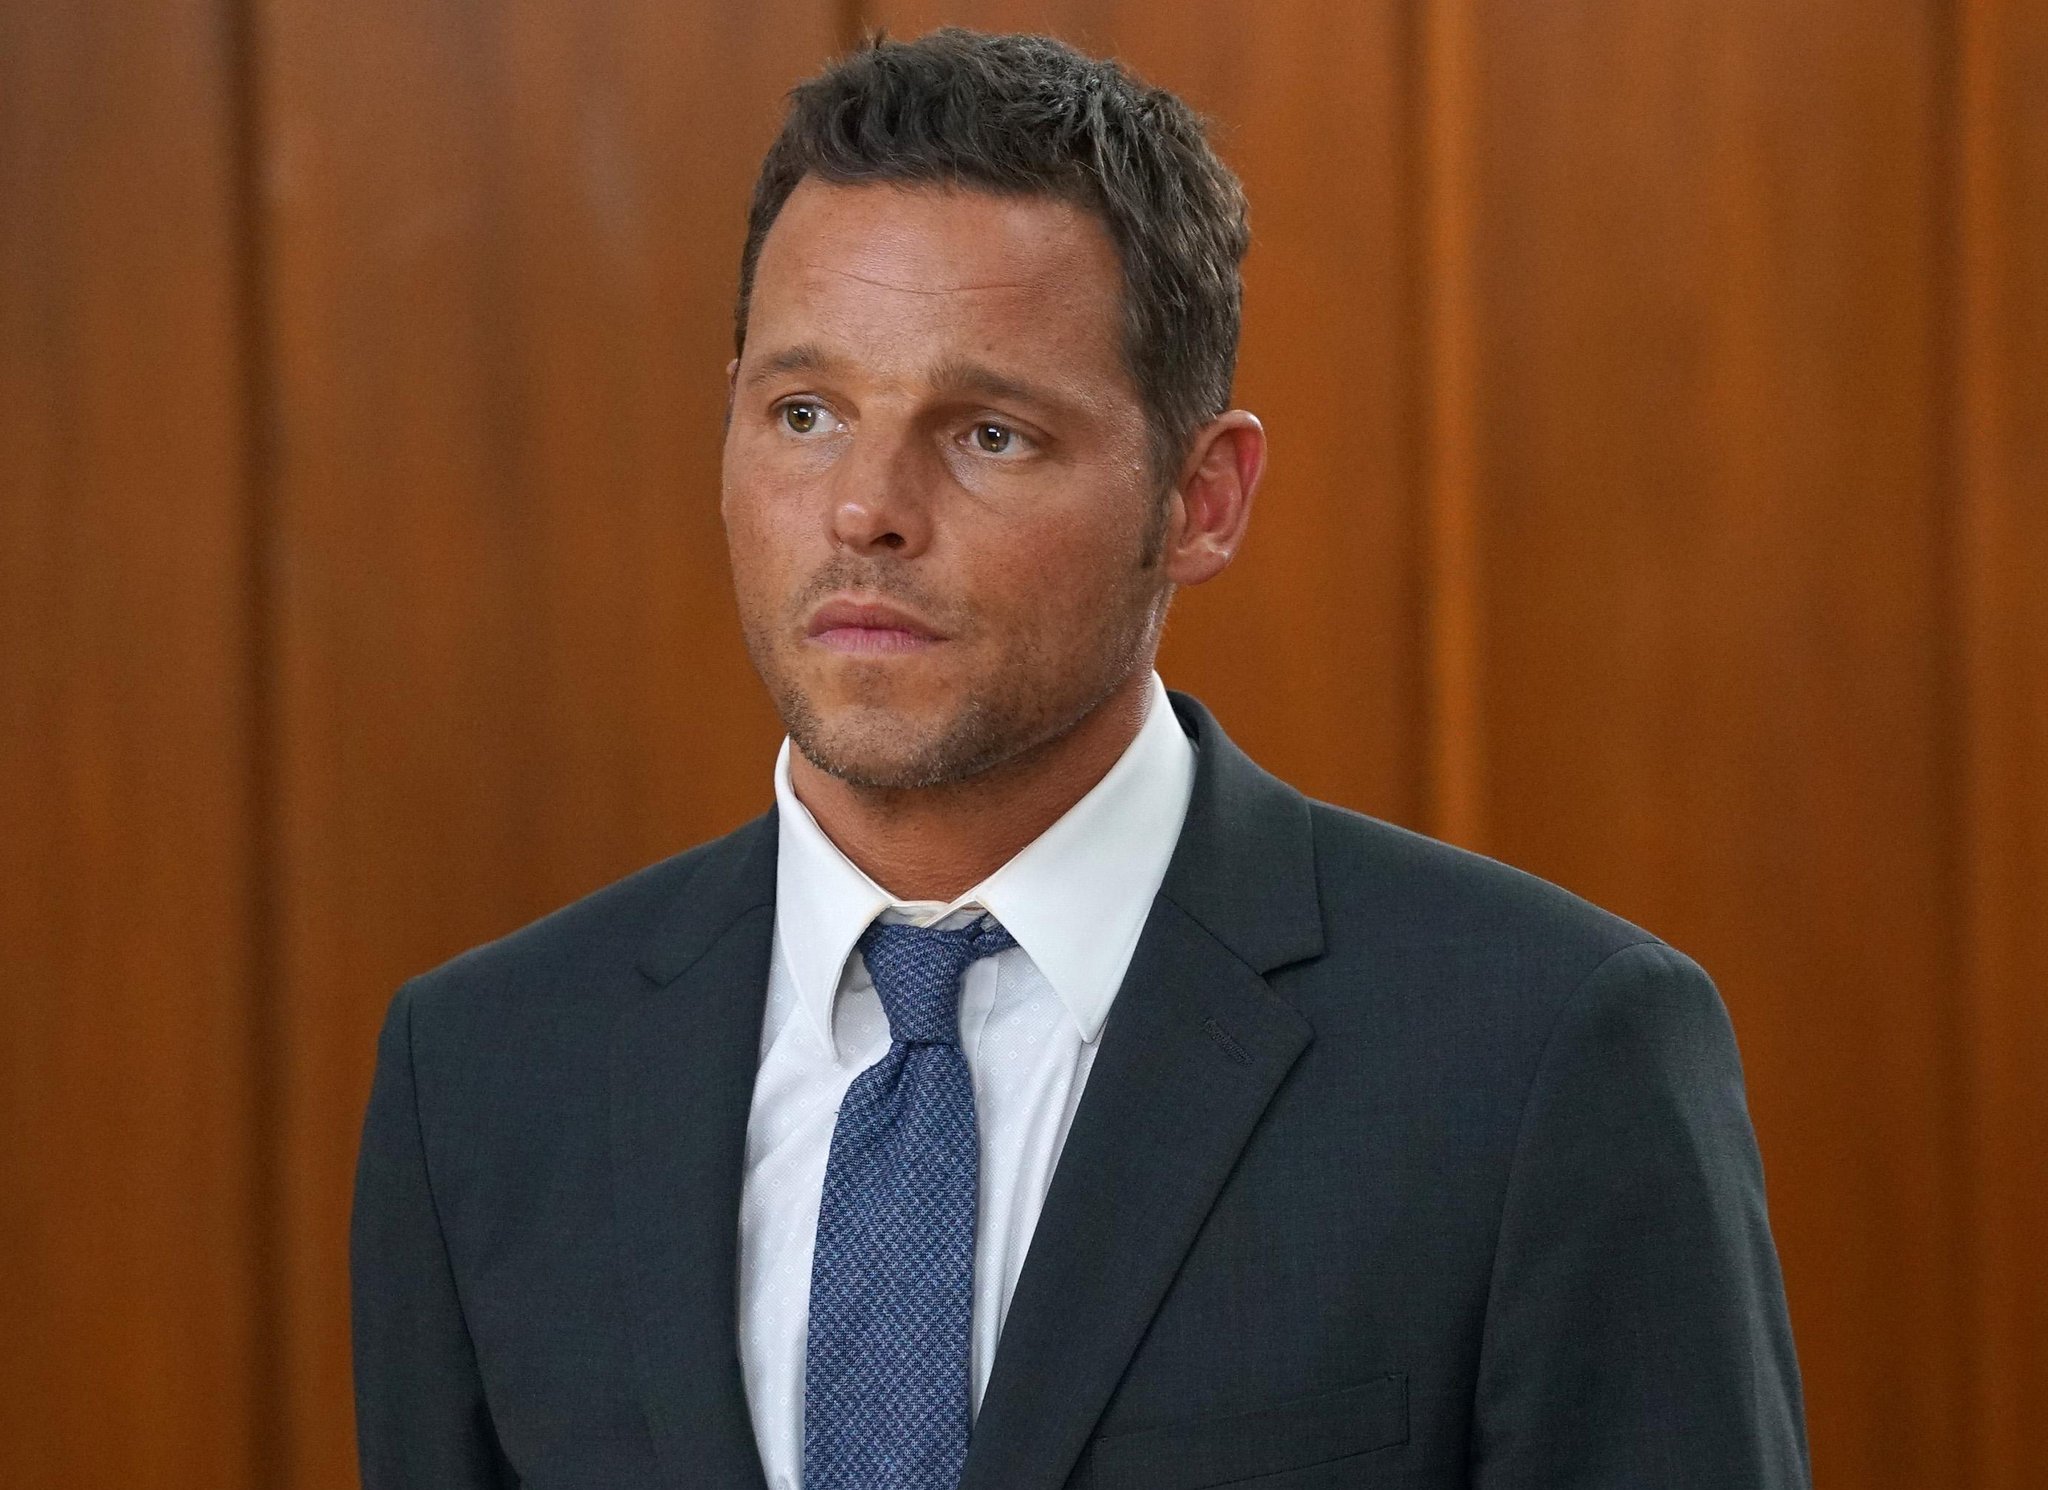 %image_alt% - Is Justin Chambers Leaving Grey's Anatomy?